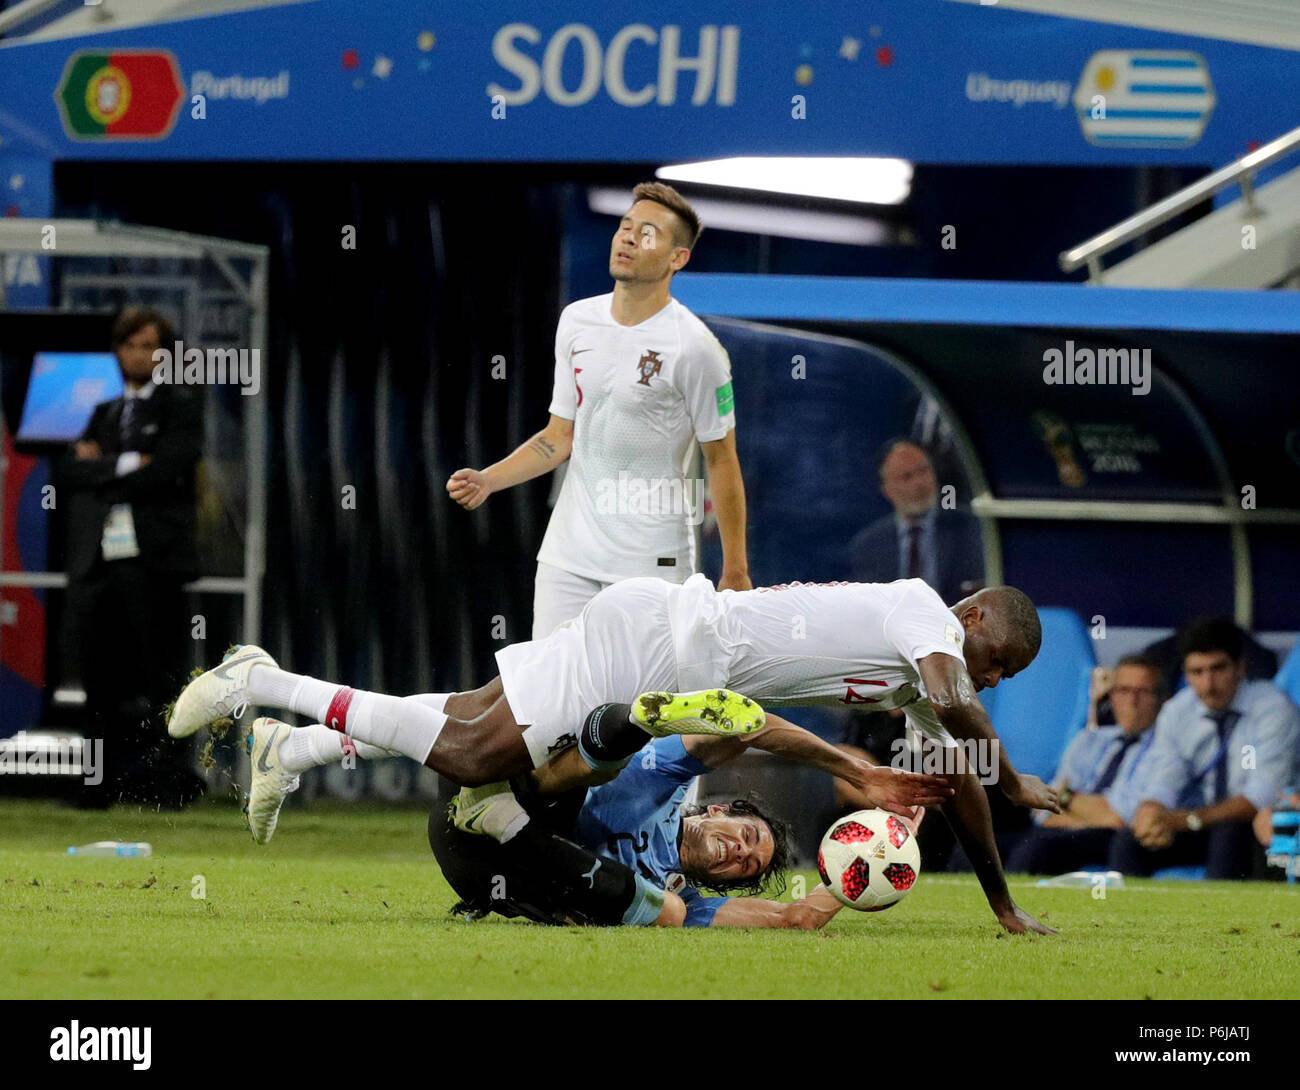 Sochi, Russia. 30th June, 2018. Fußball: Football World Cup, Uruguay vs Portugal at the Fisht Stadium. Edinson Cavani of Uruguay (bottom) and William Carvalho of Portugal vie for the ball, with Raphael Guerreiro of Portugal behind. Credit: Christian Charisius/dpa/Alamy Live News Stock Photo